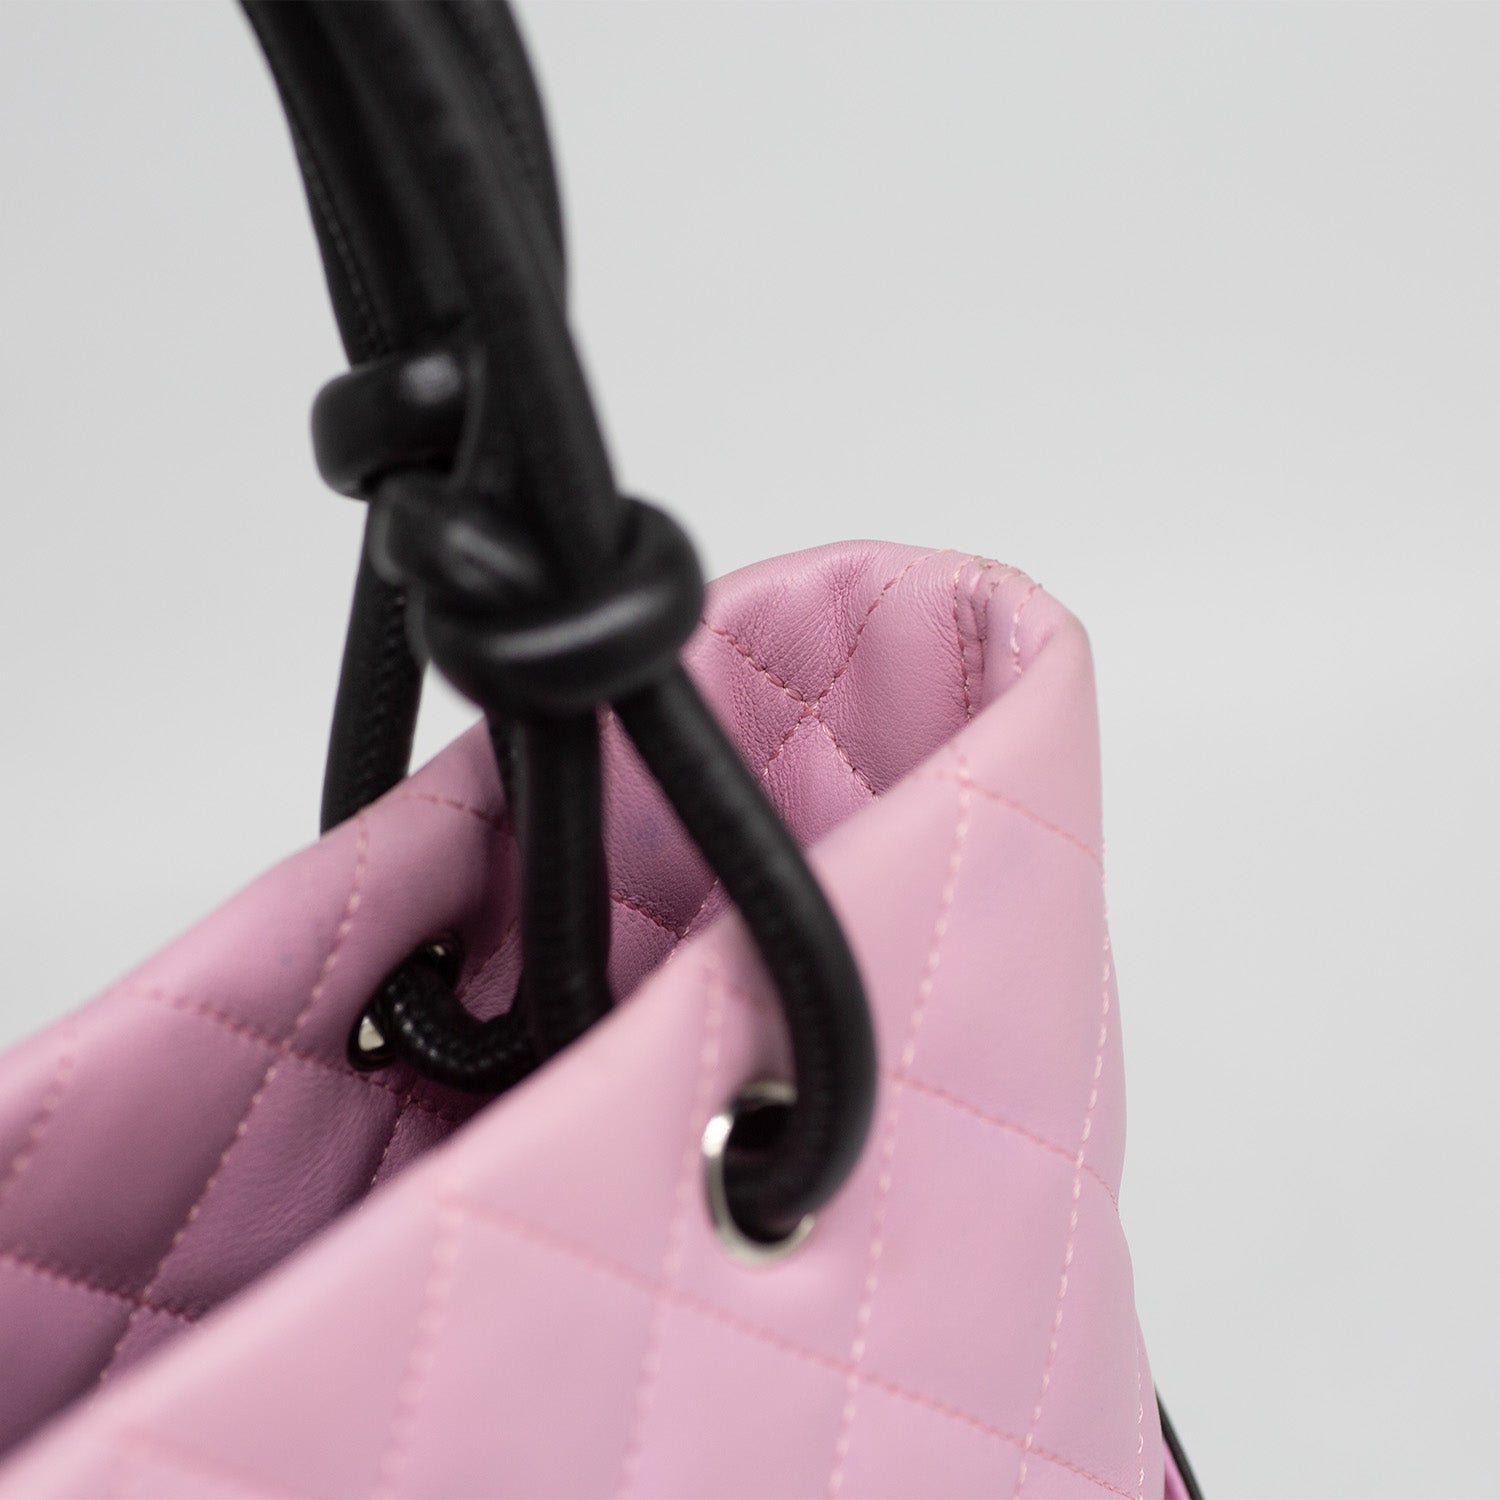 Chanel Pink/Black Quilted Leather Large Ligne Cambon Tote Bag at 1stDibs  chanel  pink and black bag, pink and black chanel bag, pink and black handbag